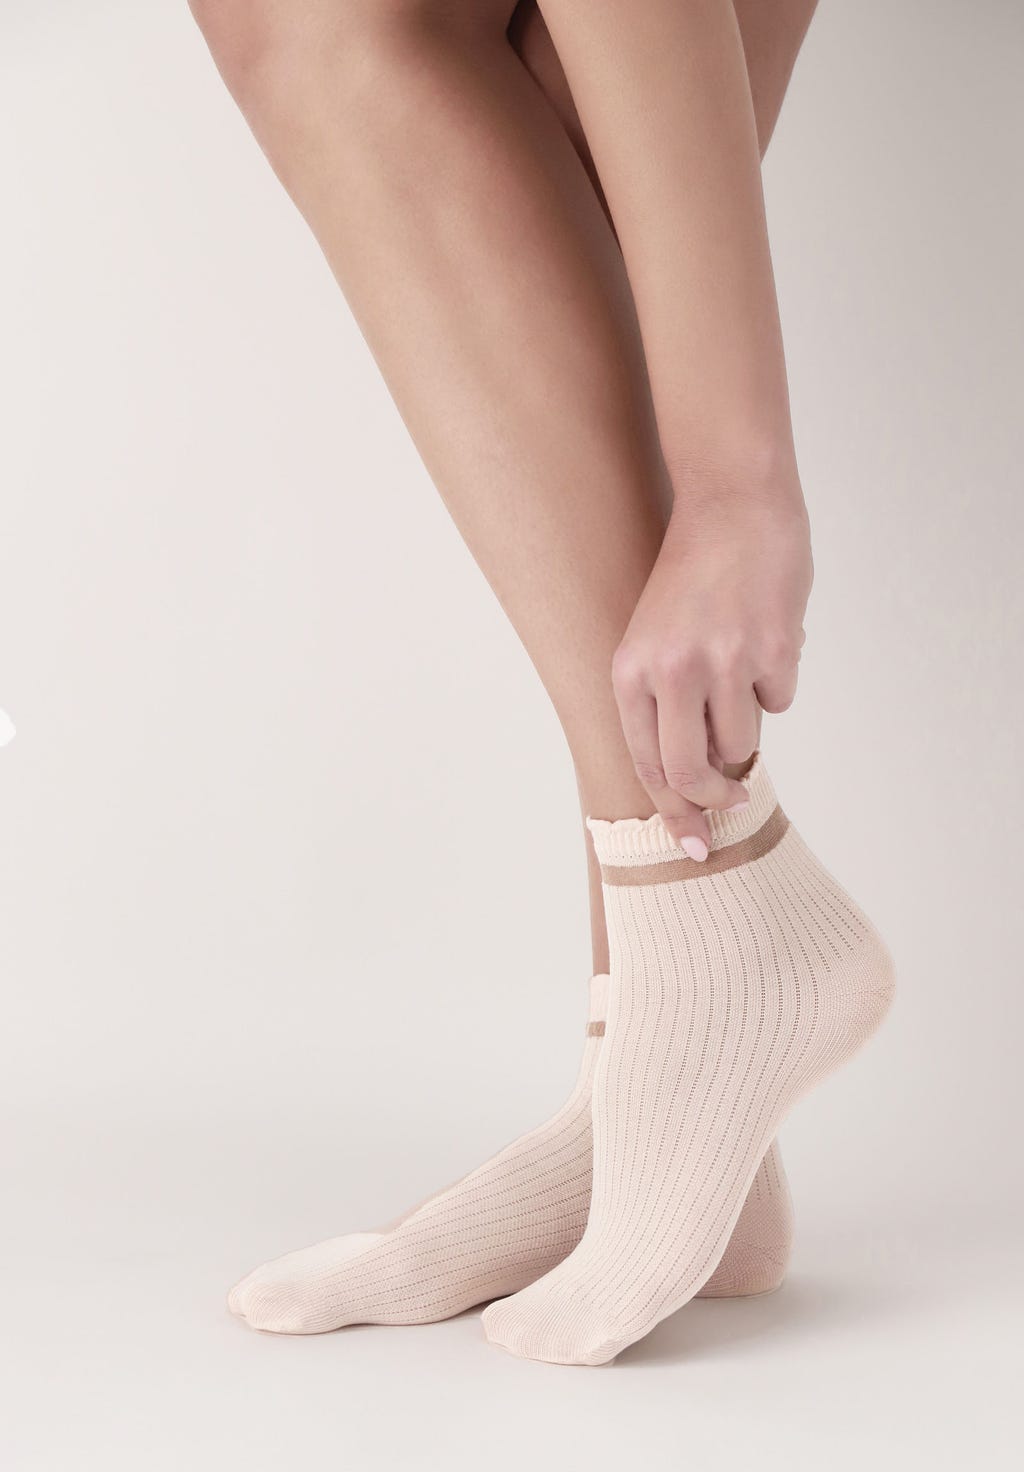 OroblÌ_ Gentle Sock - Light peach (powder) ribbed cotton fashion ankle socks with a sheer striped cuff and scalloped edge.